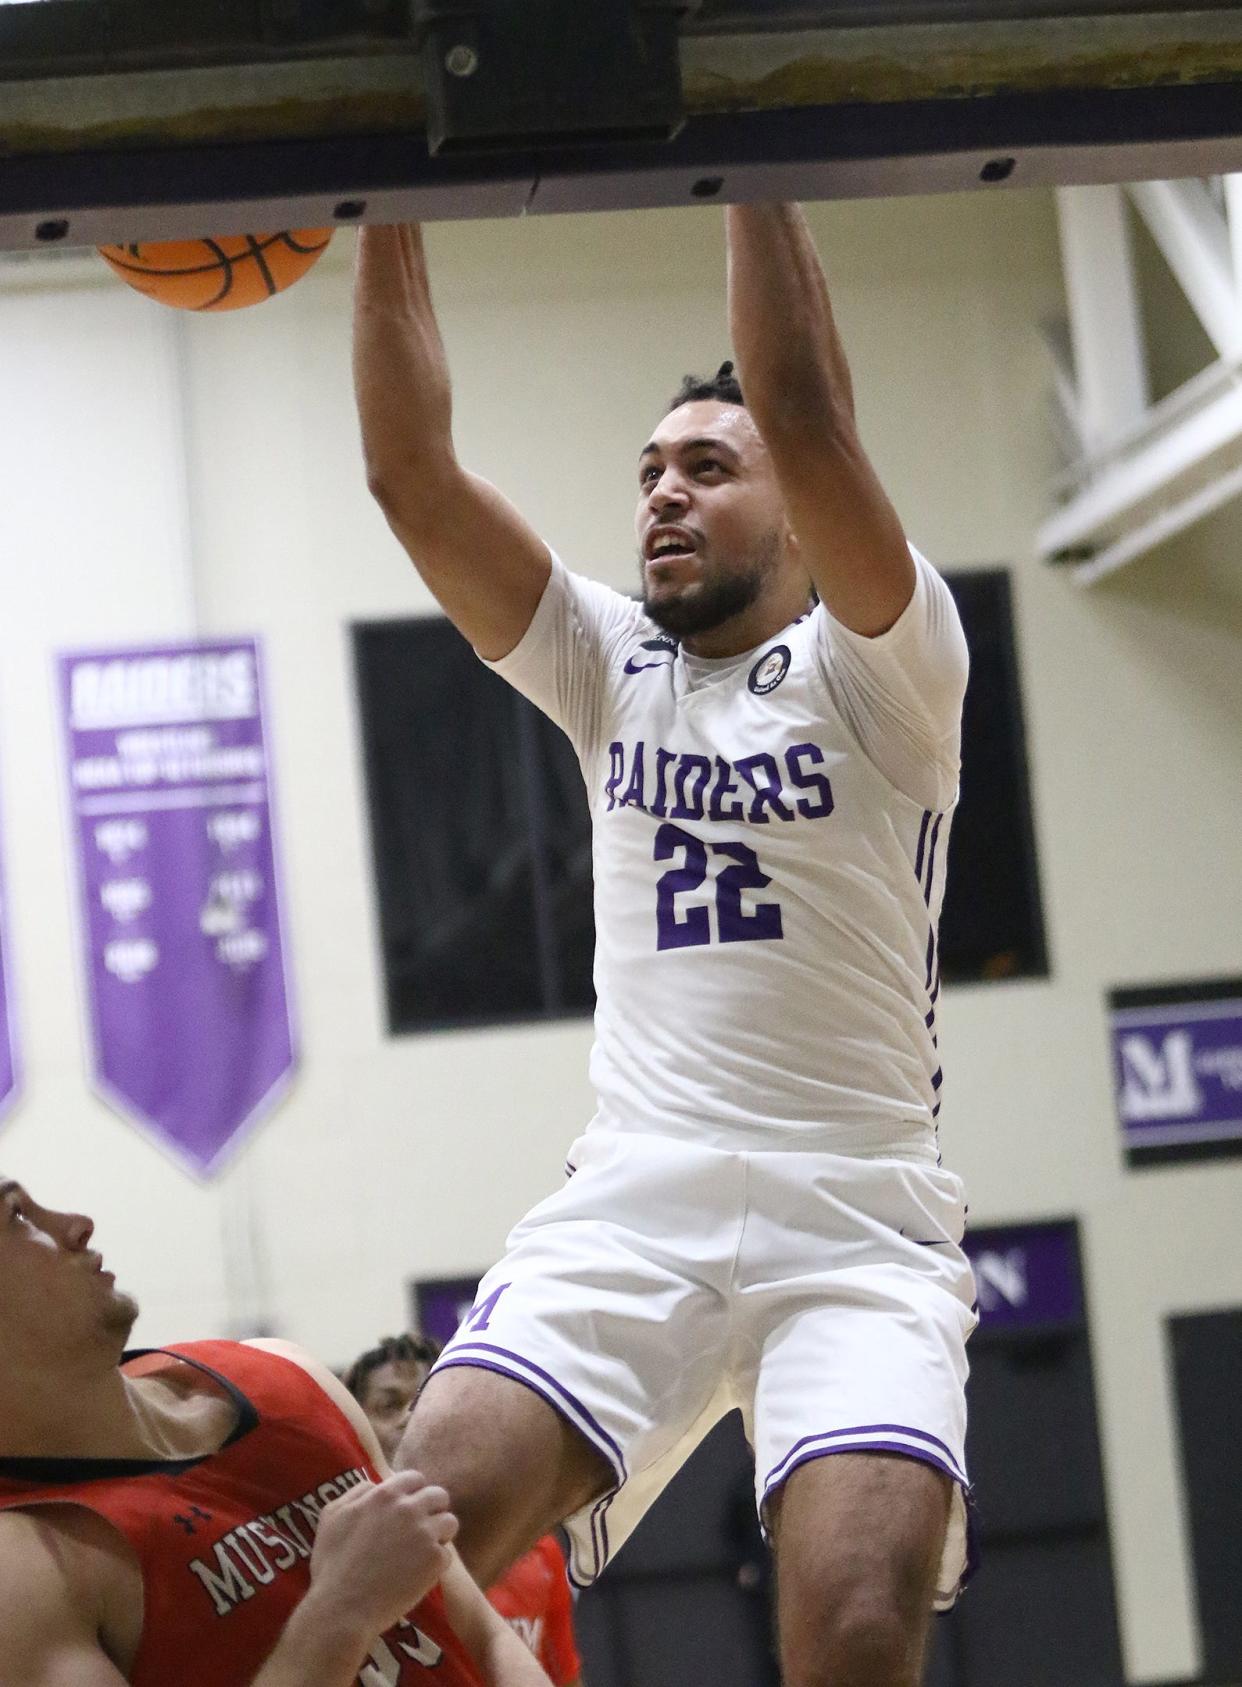 Mount Union's Christian Parker recorded his seventh double-double of the season in Friday's NCAA Division III Tournament win over Anderson.